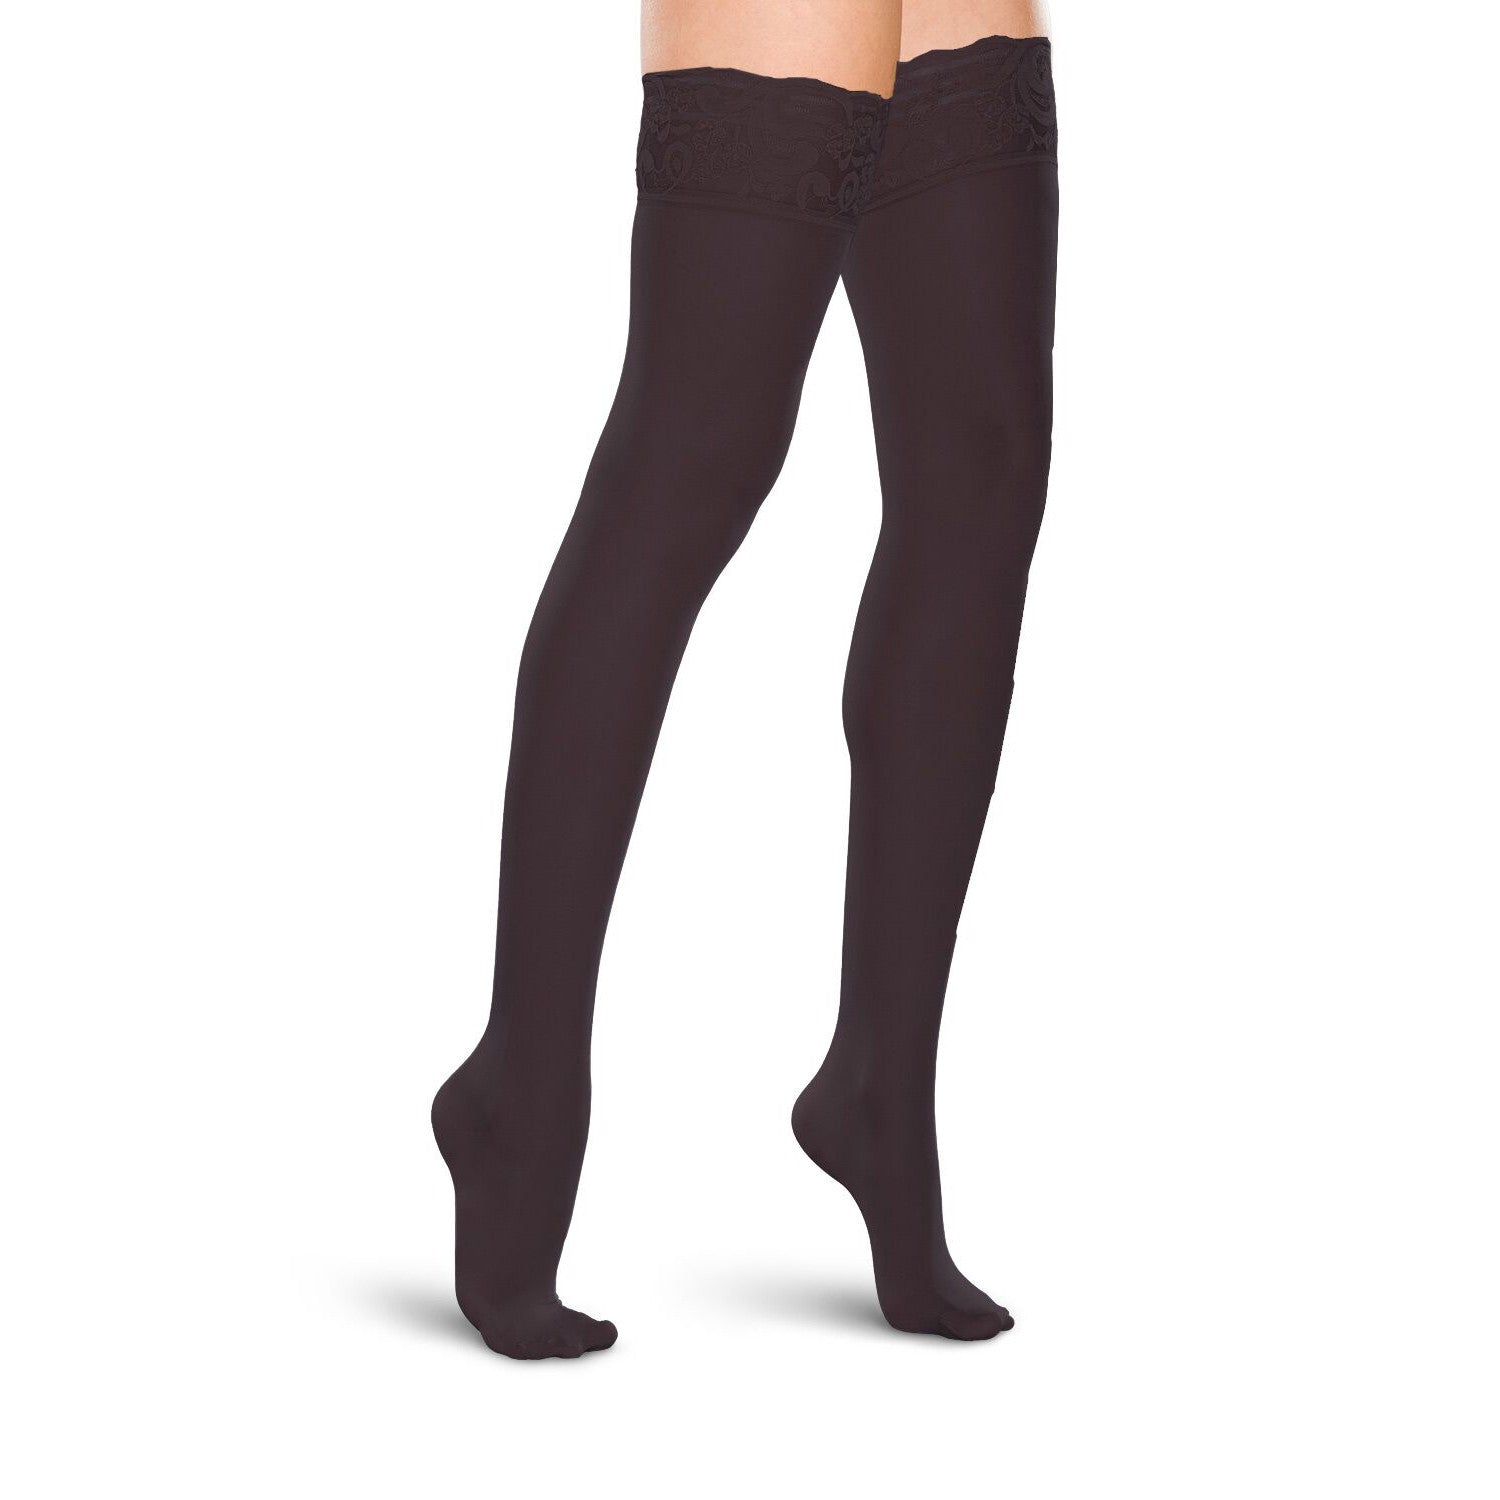 Therafirm Women's Closed Toe Thigh Highs w/ Lace Band - 15-20 mmHg